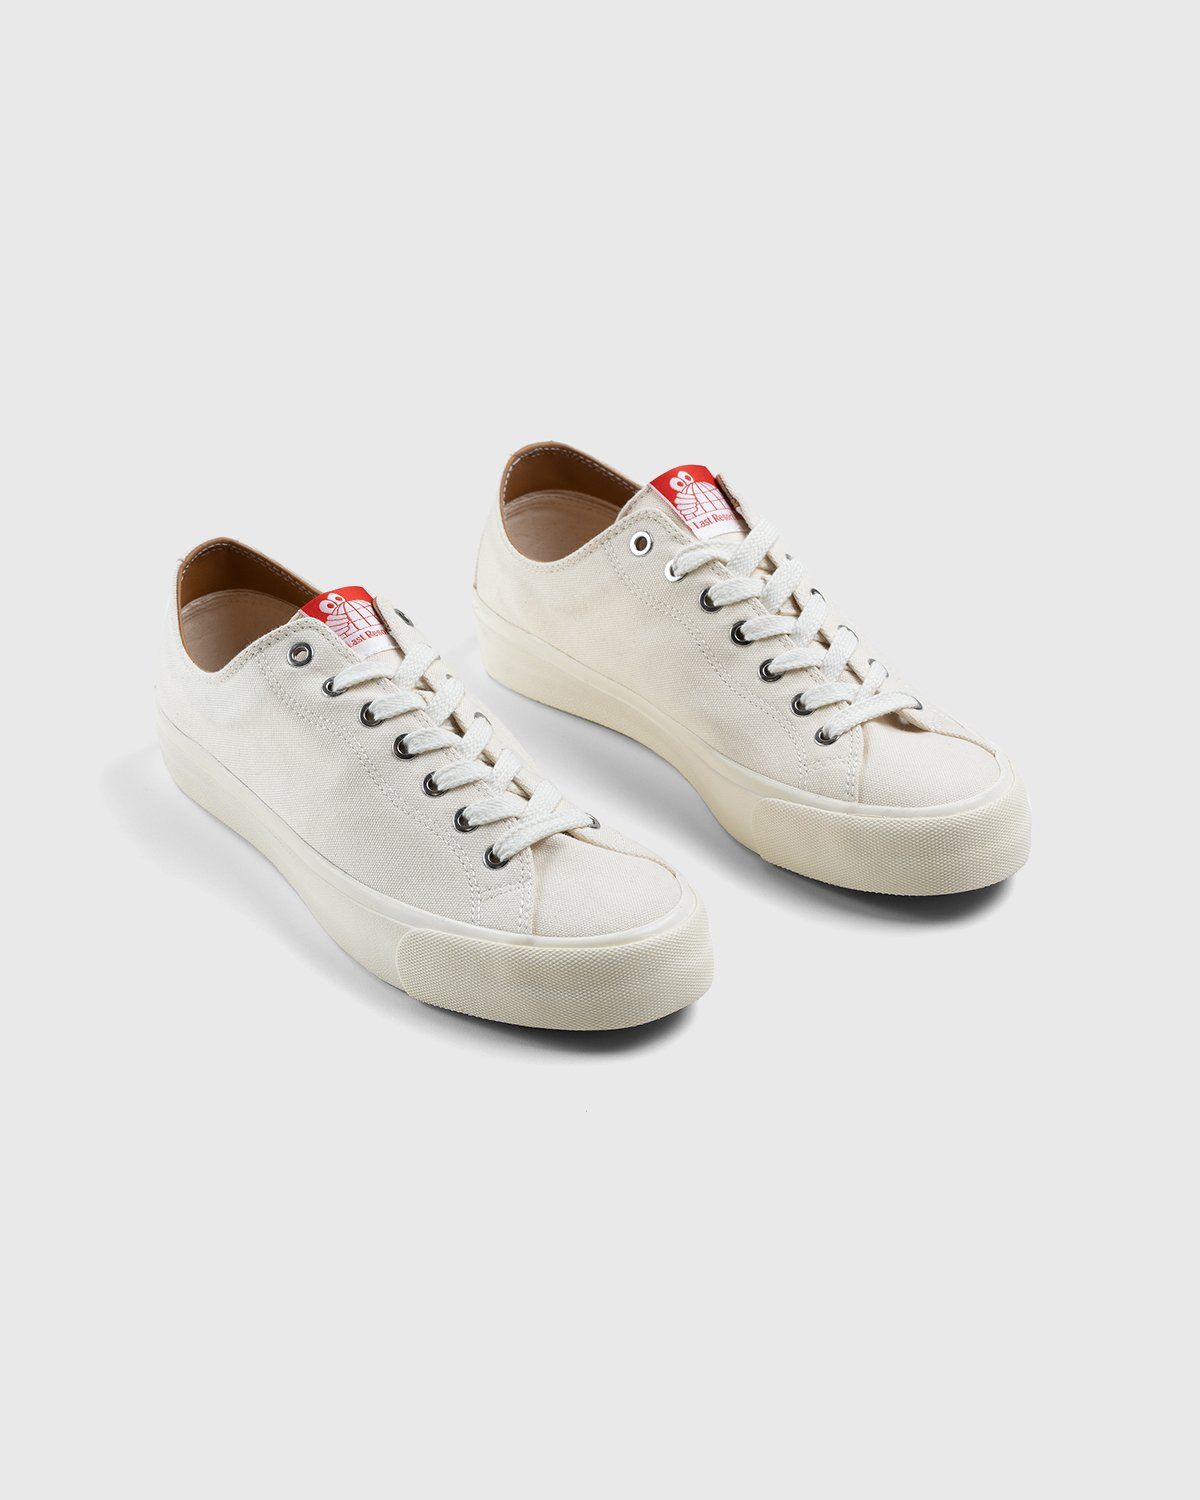 Last Resort AB – VM003 Canvas Lo White/White - Low Top Sneakers - White - Image 3